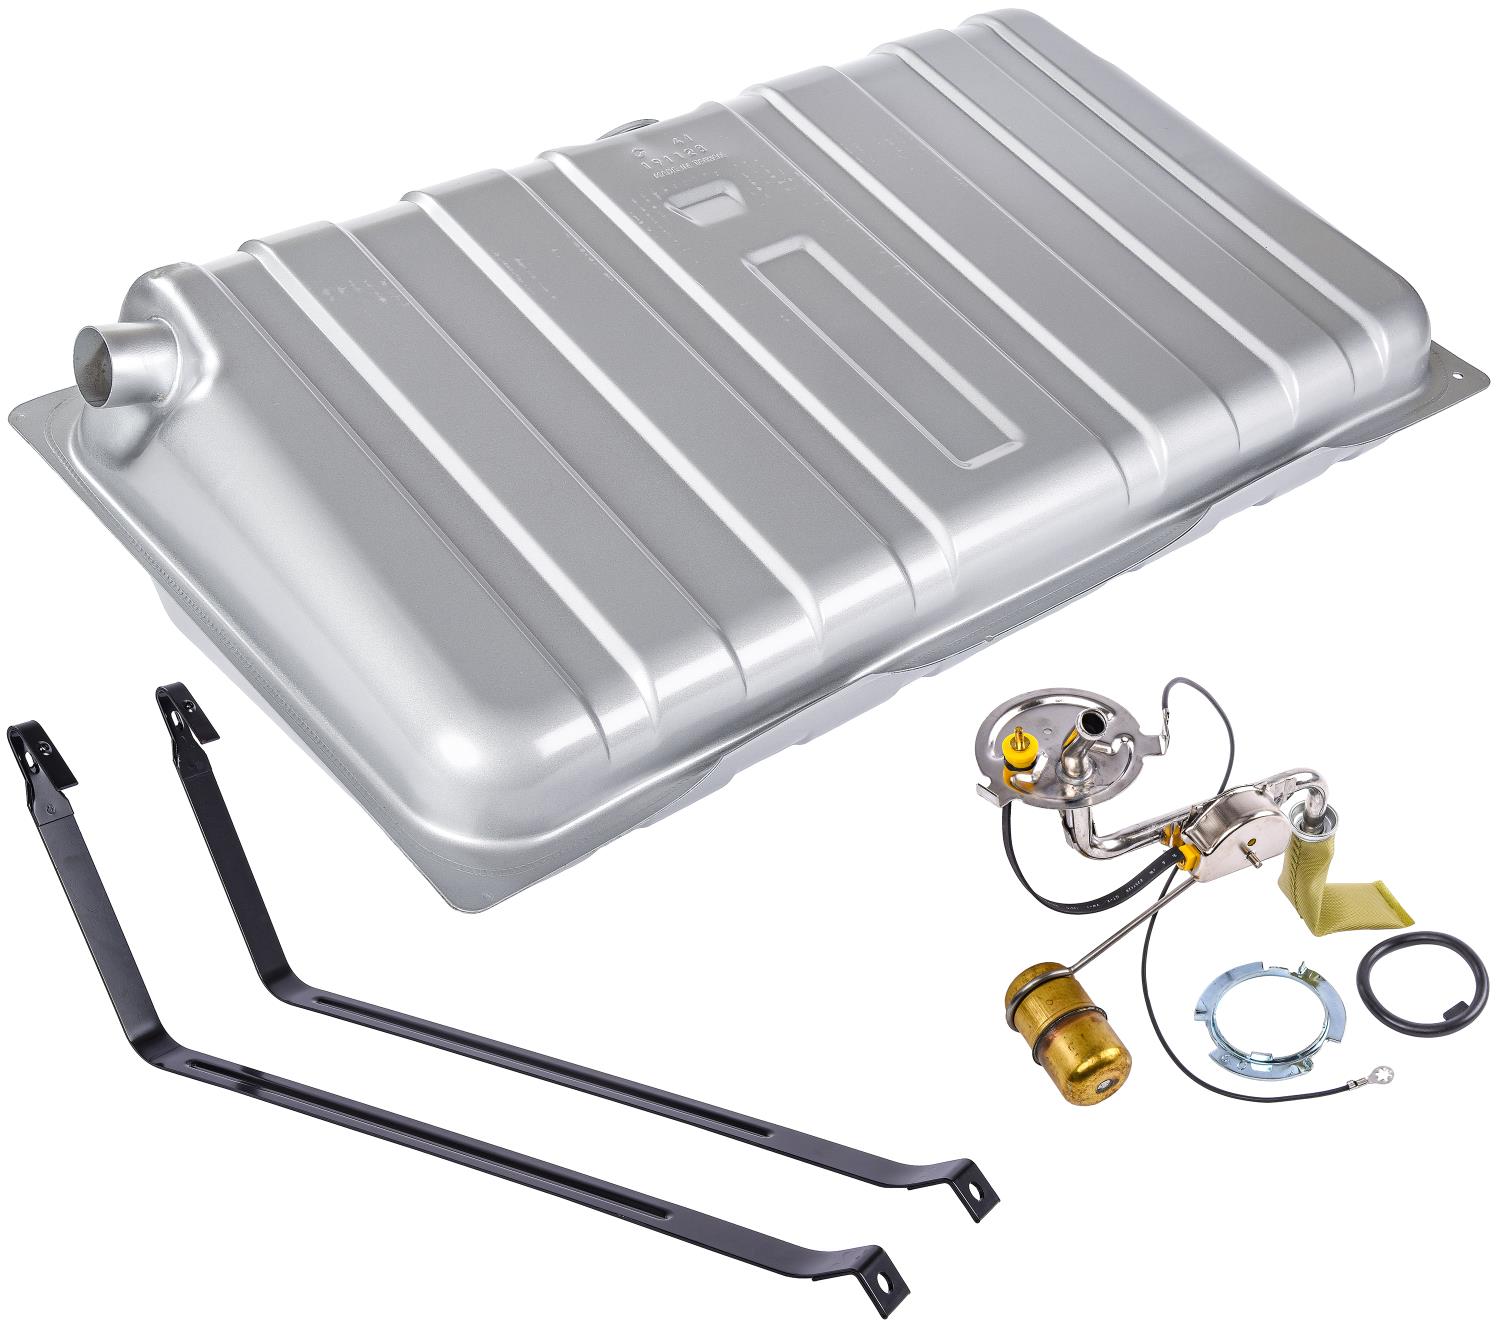 Fuel Tank Kit with Straps & Sending Unit for 1962-1965 Chevy II [16-Gallon]